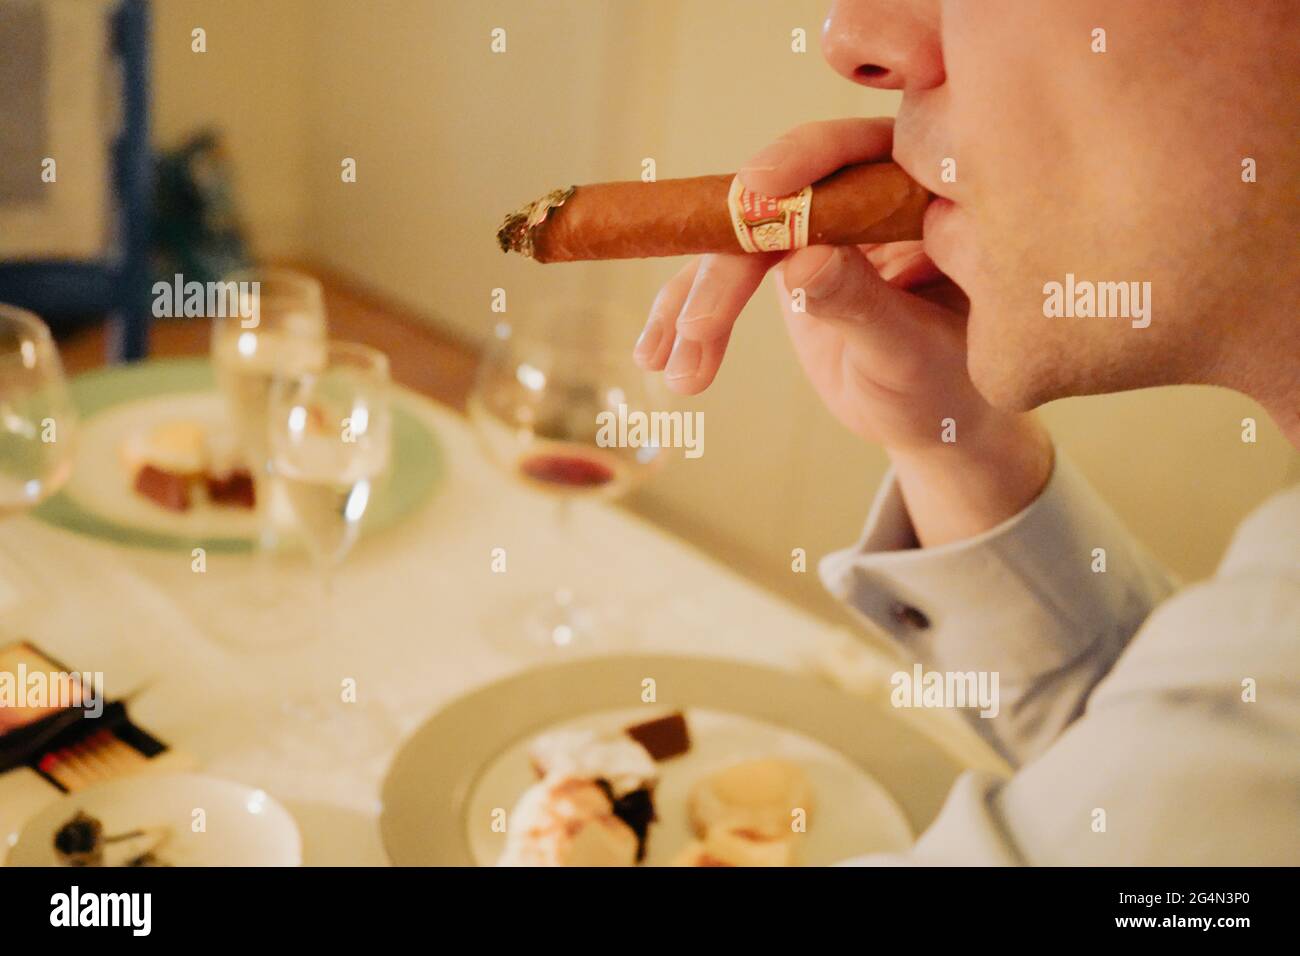 Italian man smokes a cigar after finishing red wine dinner Stock Photo